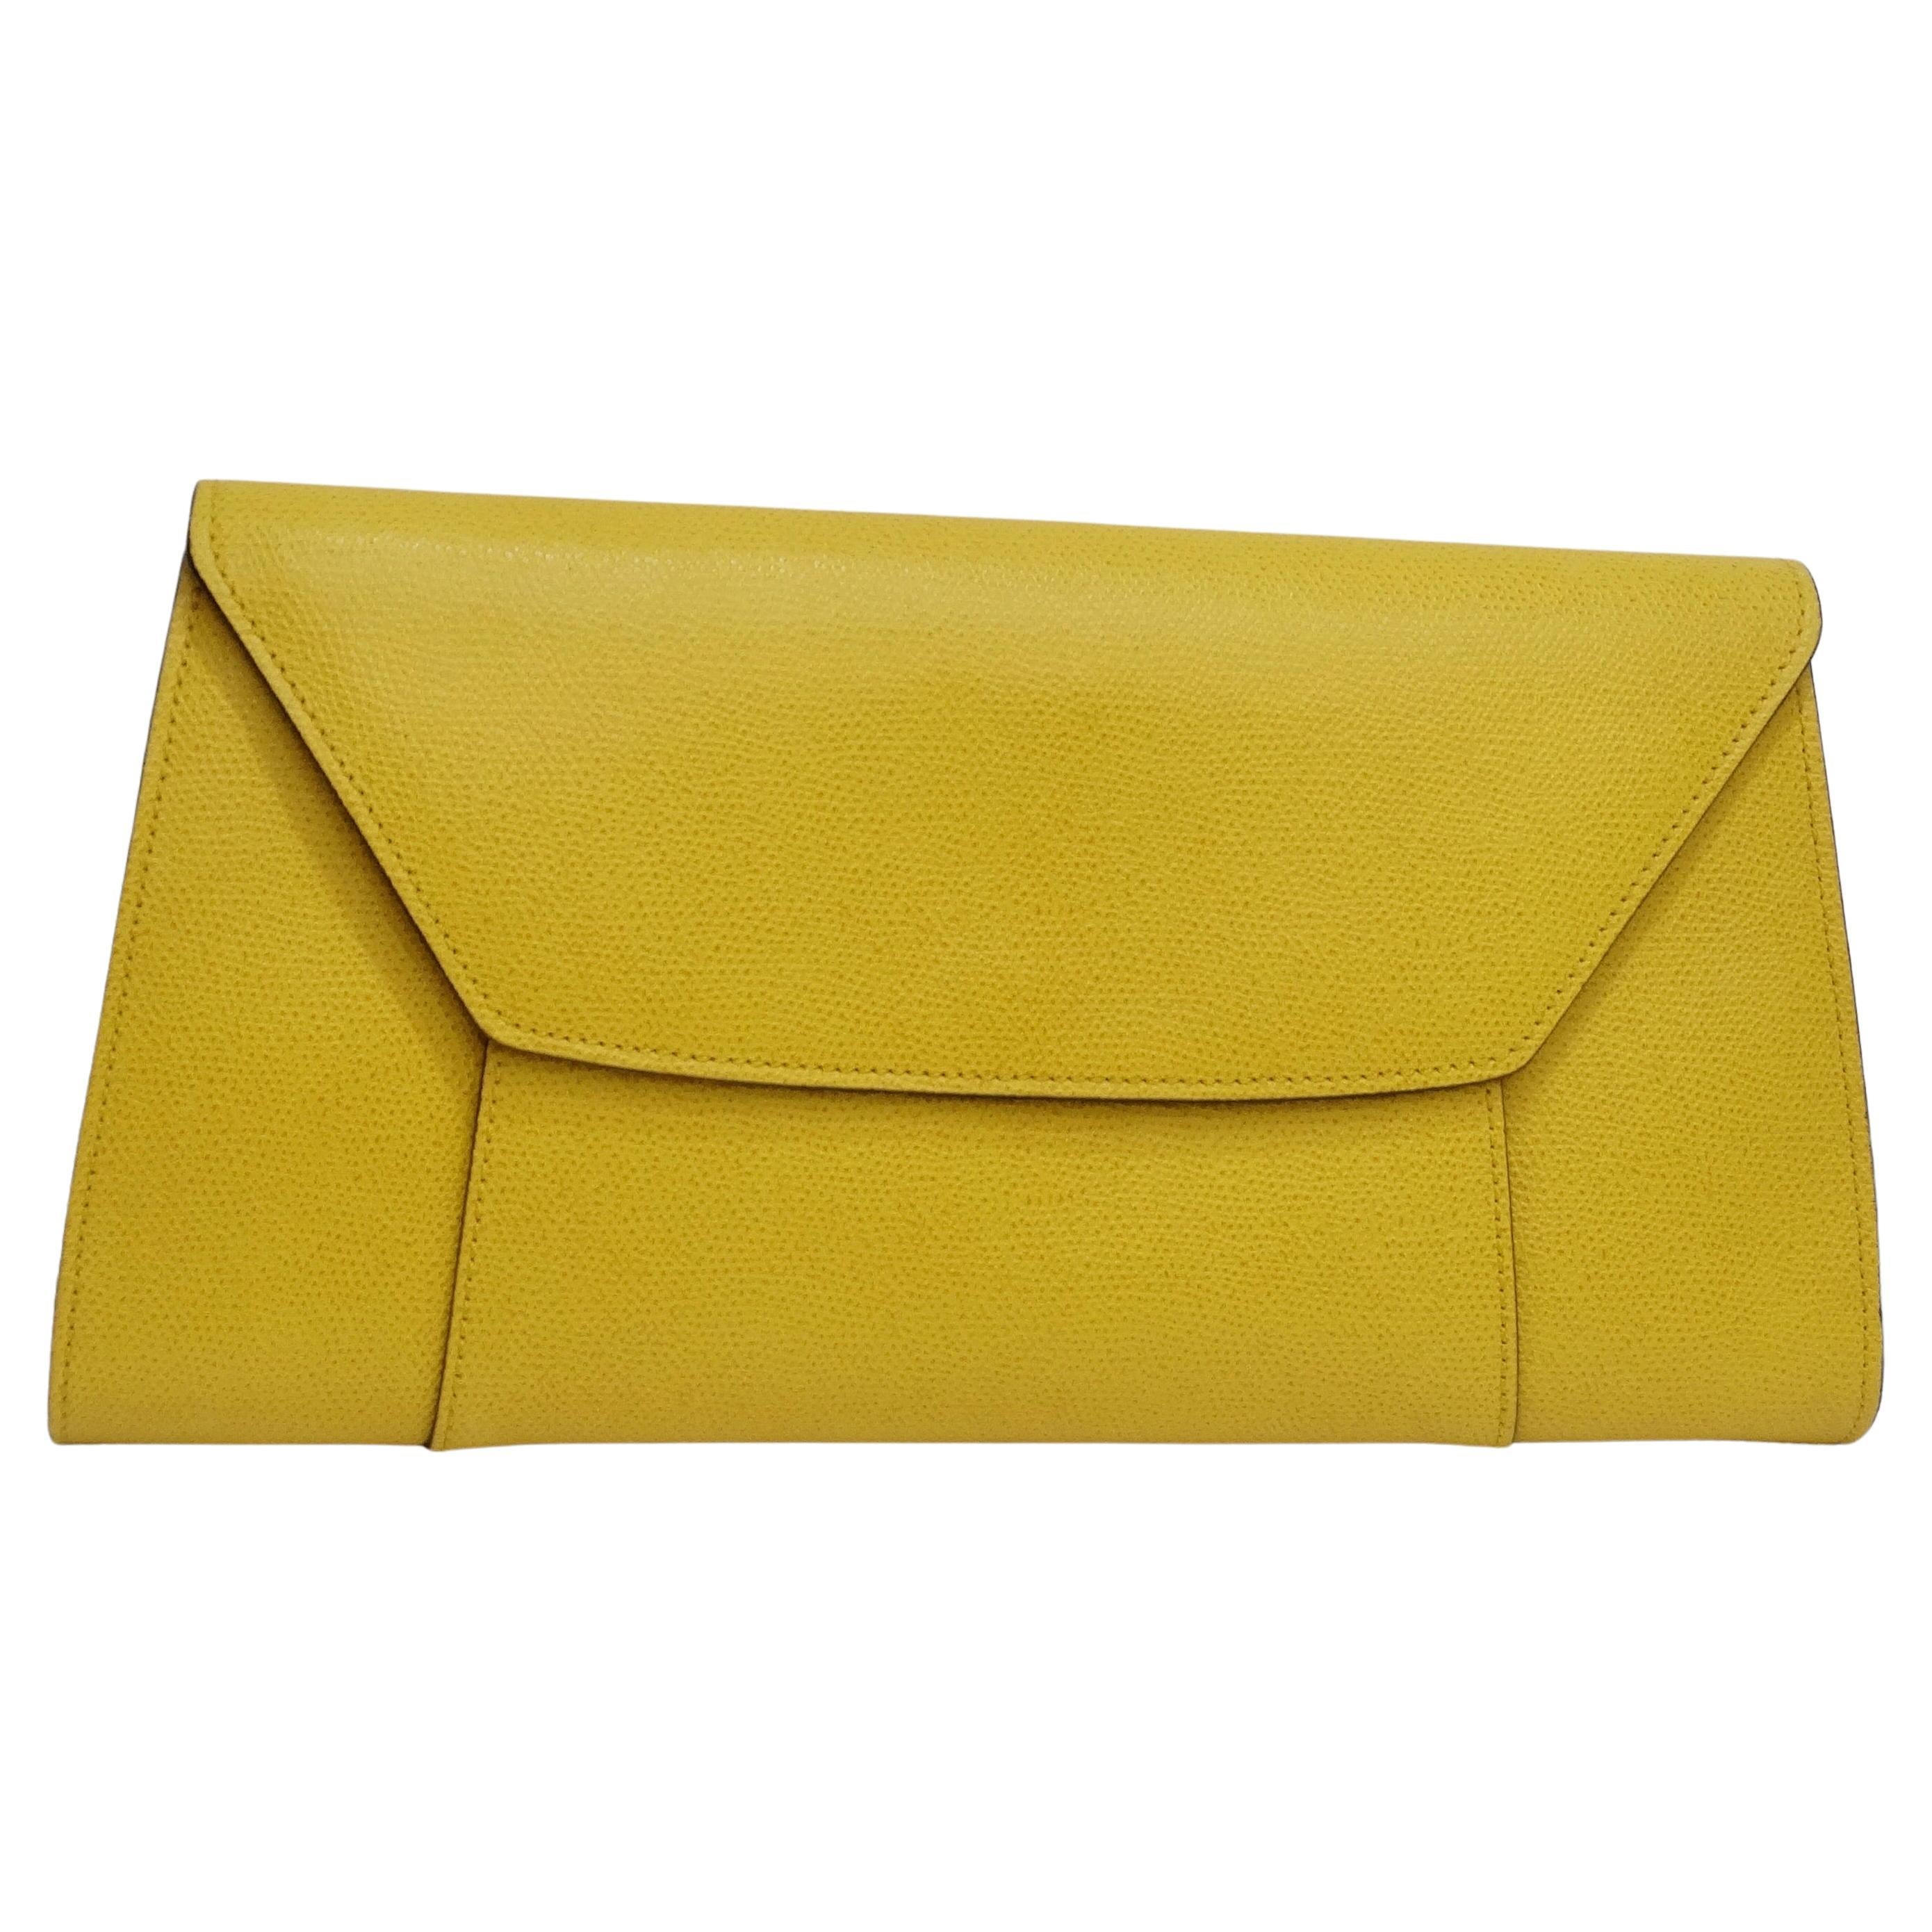 Valextra Yellow Leather Clutch For Sale